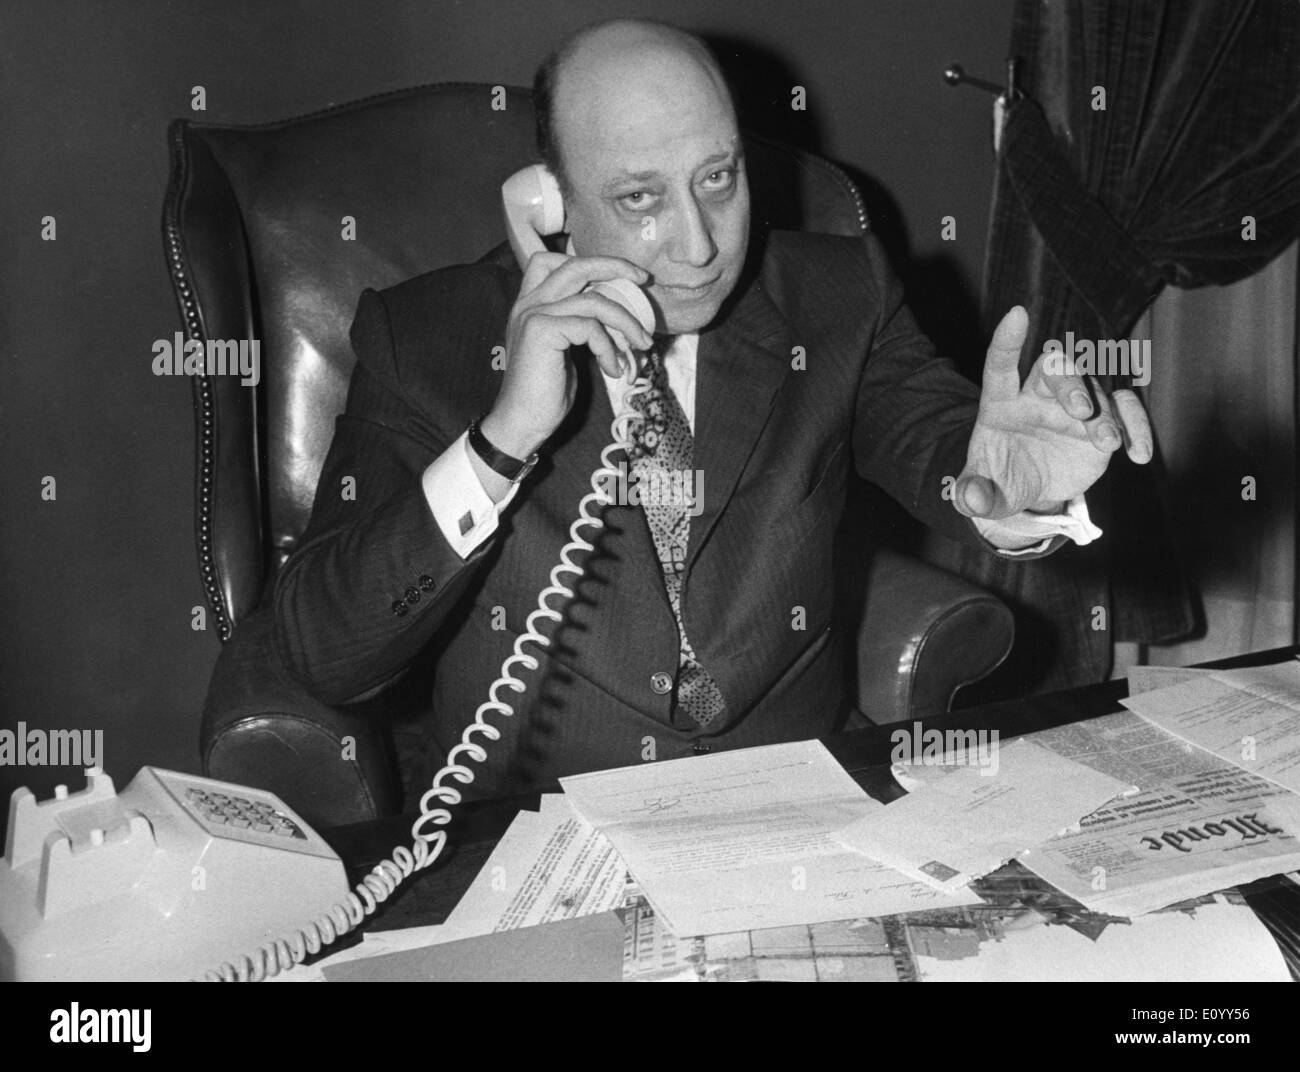 Nov. 3, 1971 - JEAN-PIERRE MELVILLE talking on phone at his desk. Stock Photo